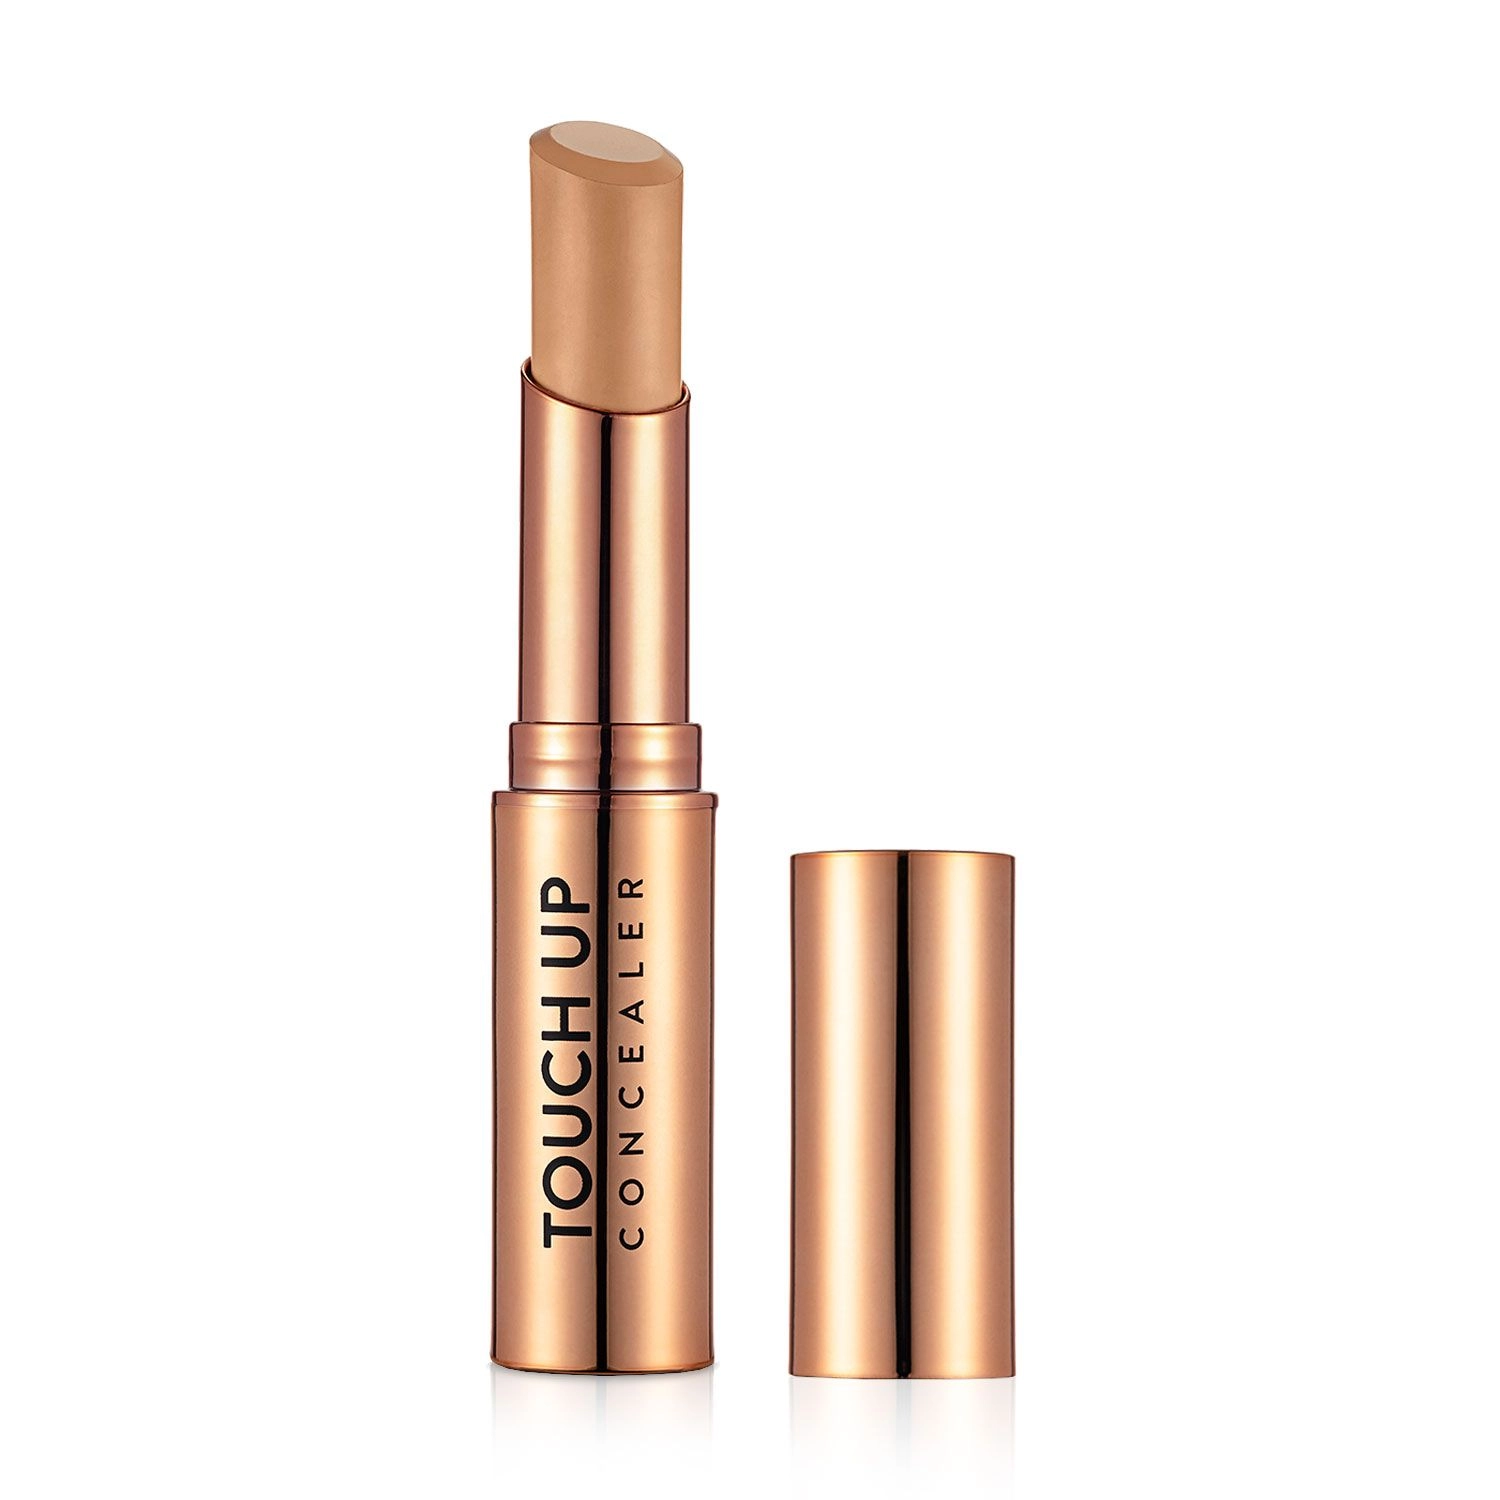 Flormar Консилер-стик для лица Touch Up Concealer 040 Light, 3.5 г - фото N1